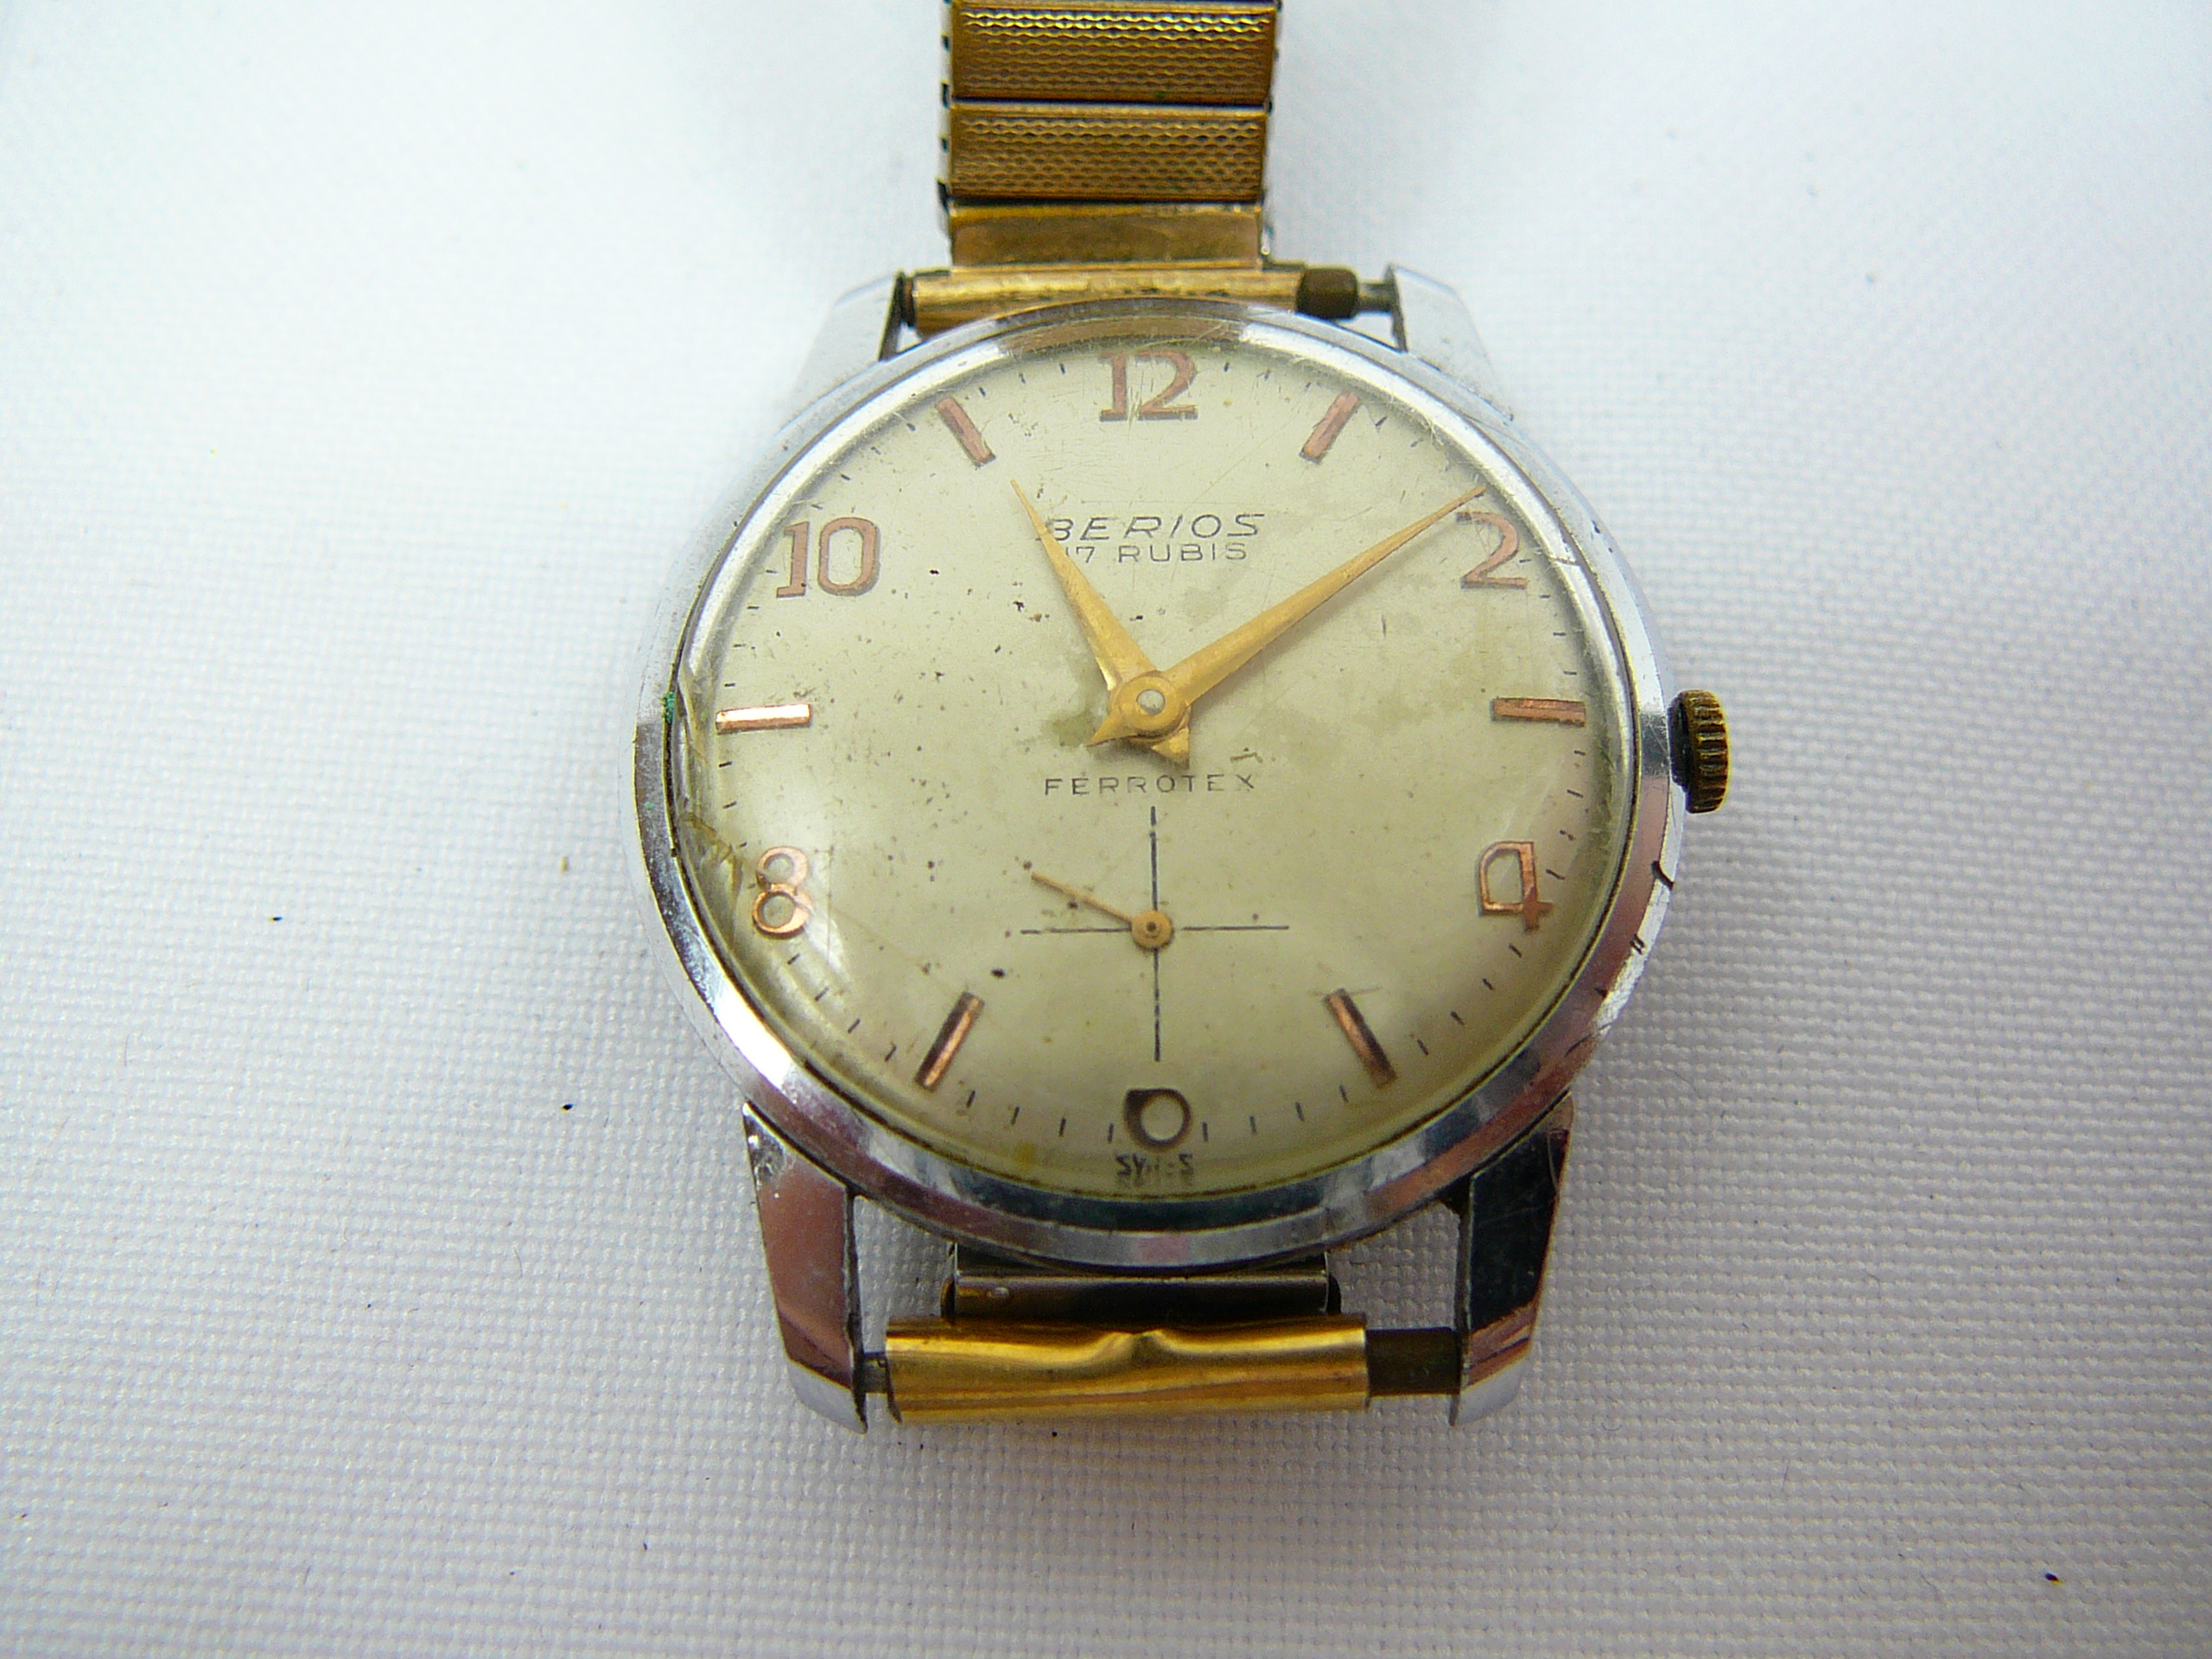 Gents vintage Berious wristwatch - Image 2 of 4